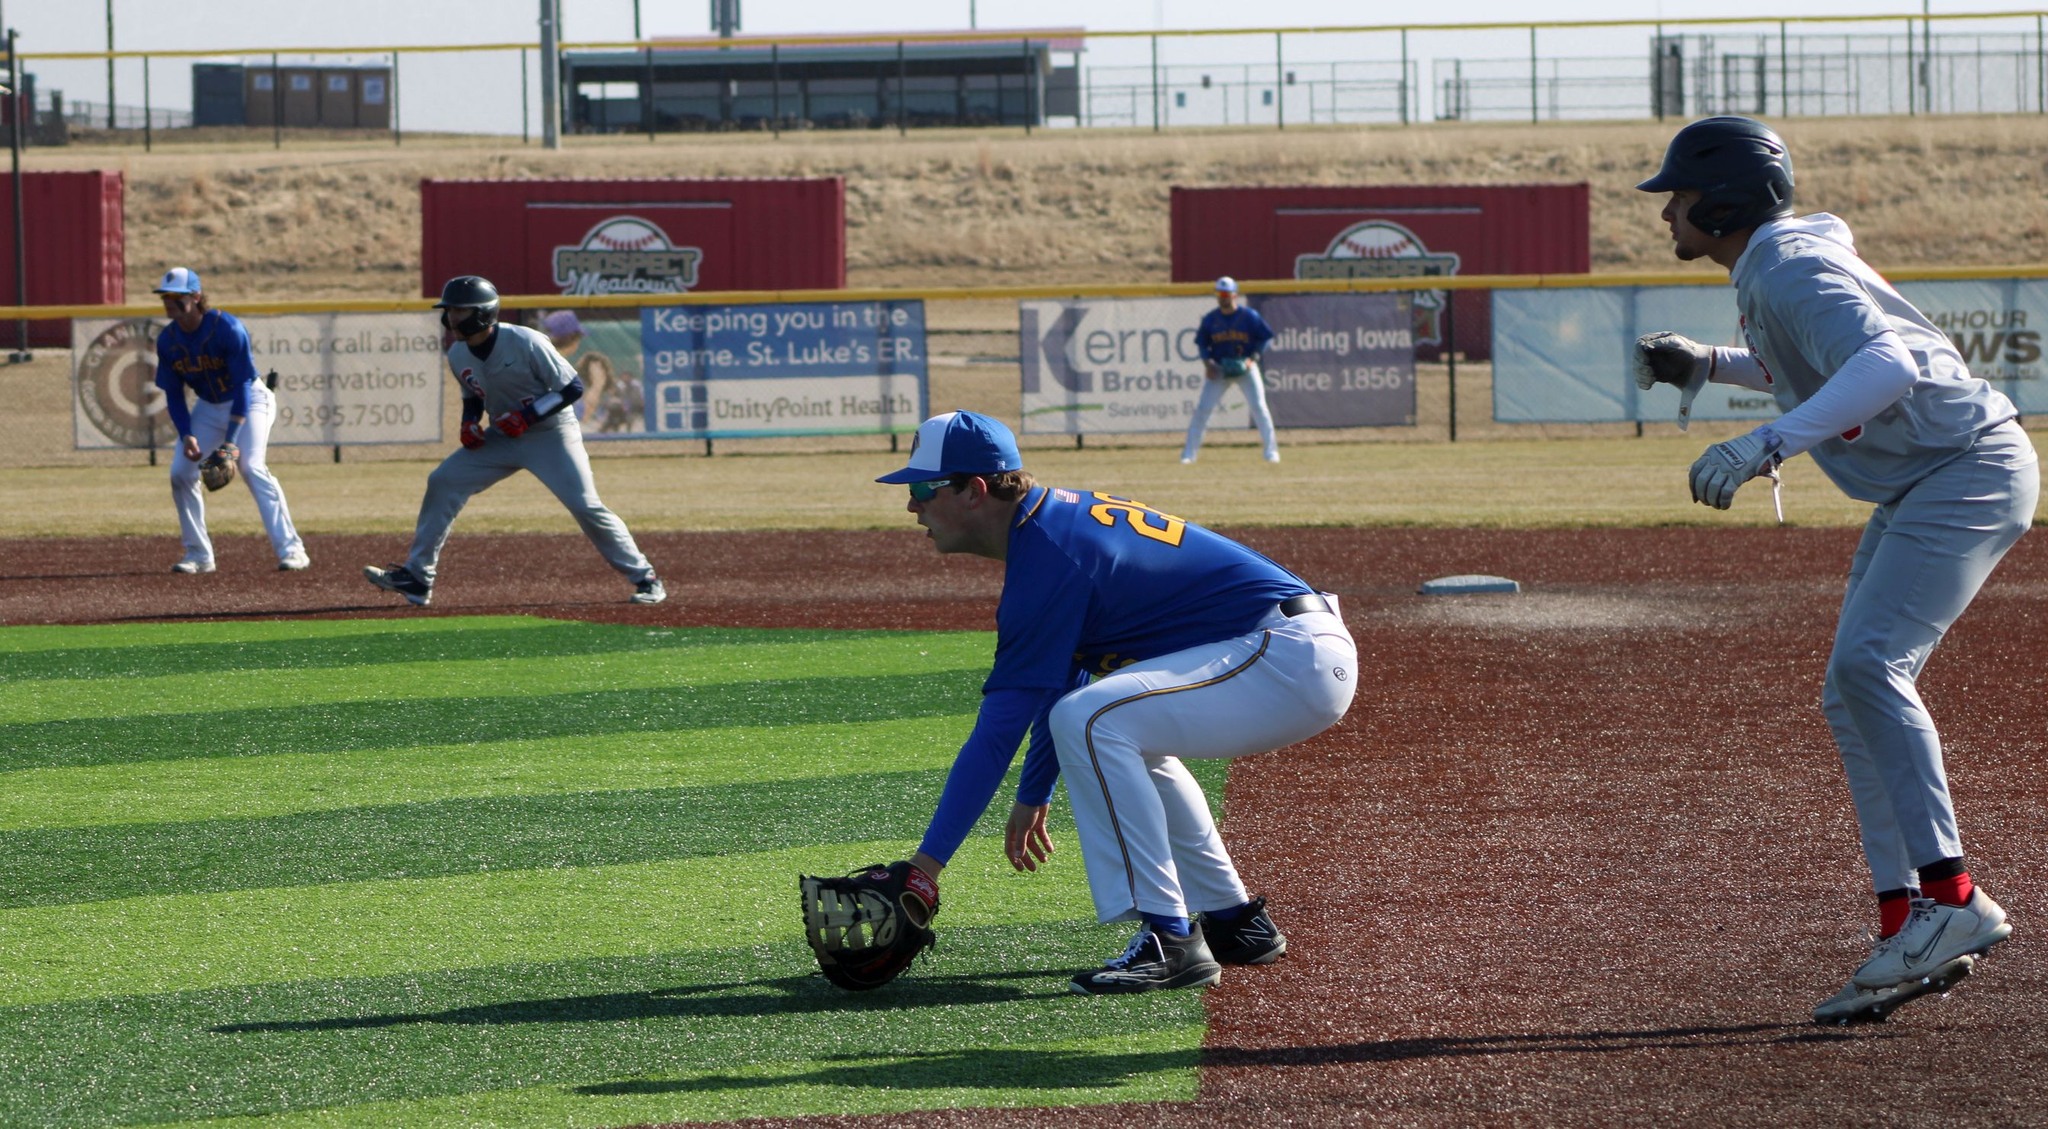 NIACC's John Doty was selected as the ICCAC Division II baseball player of the week for the week of April 3-9.